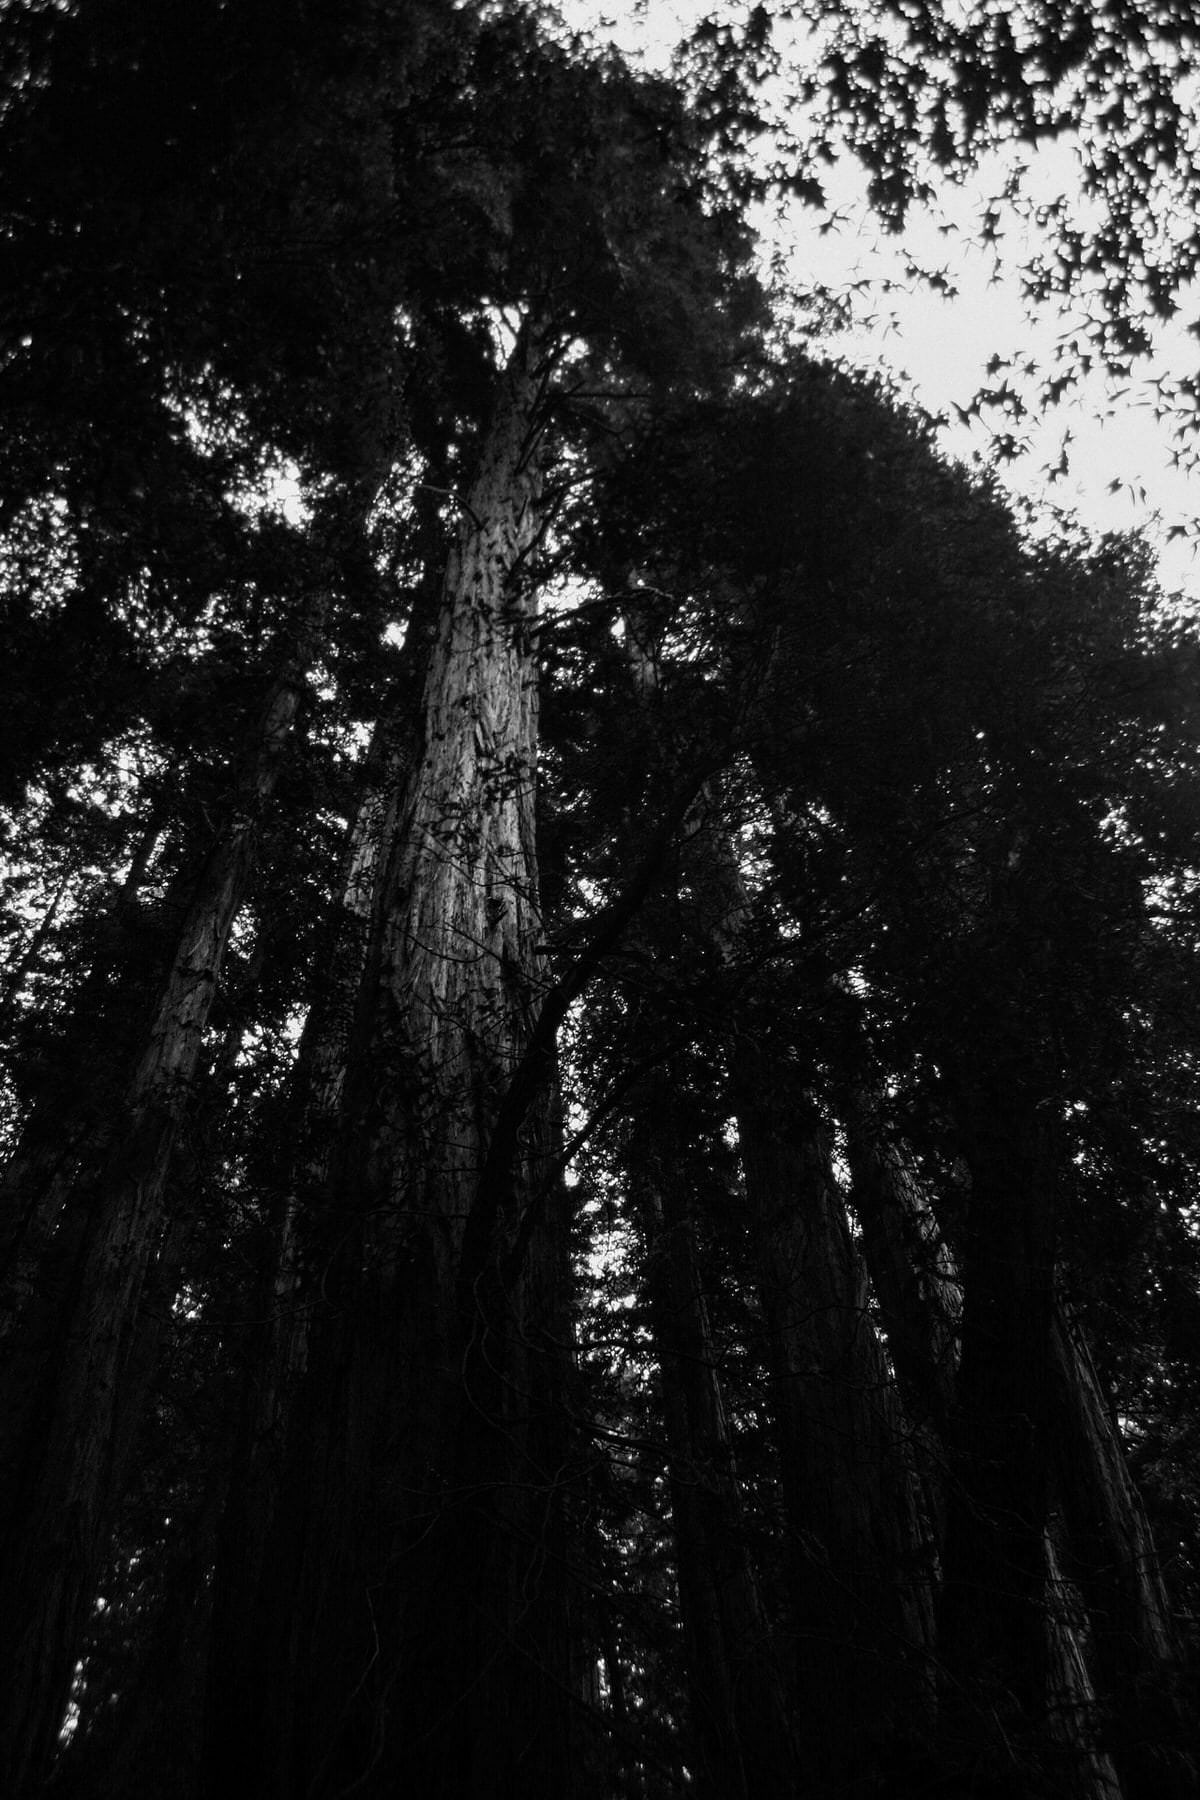 Muir-Woods-National-Monument-California-black-and-white-fine-art-photography-by-Studio-L-photographer-Laura-Schneider-_3565